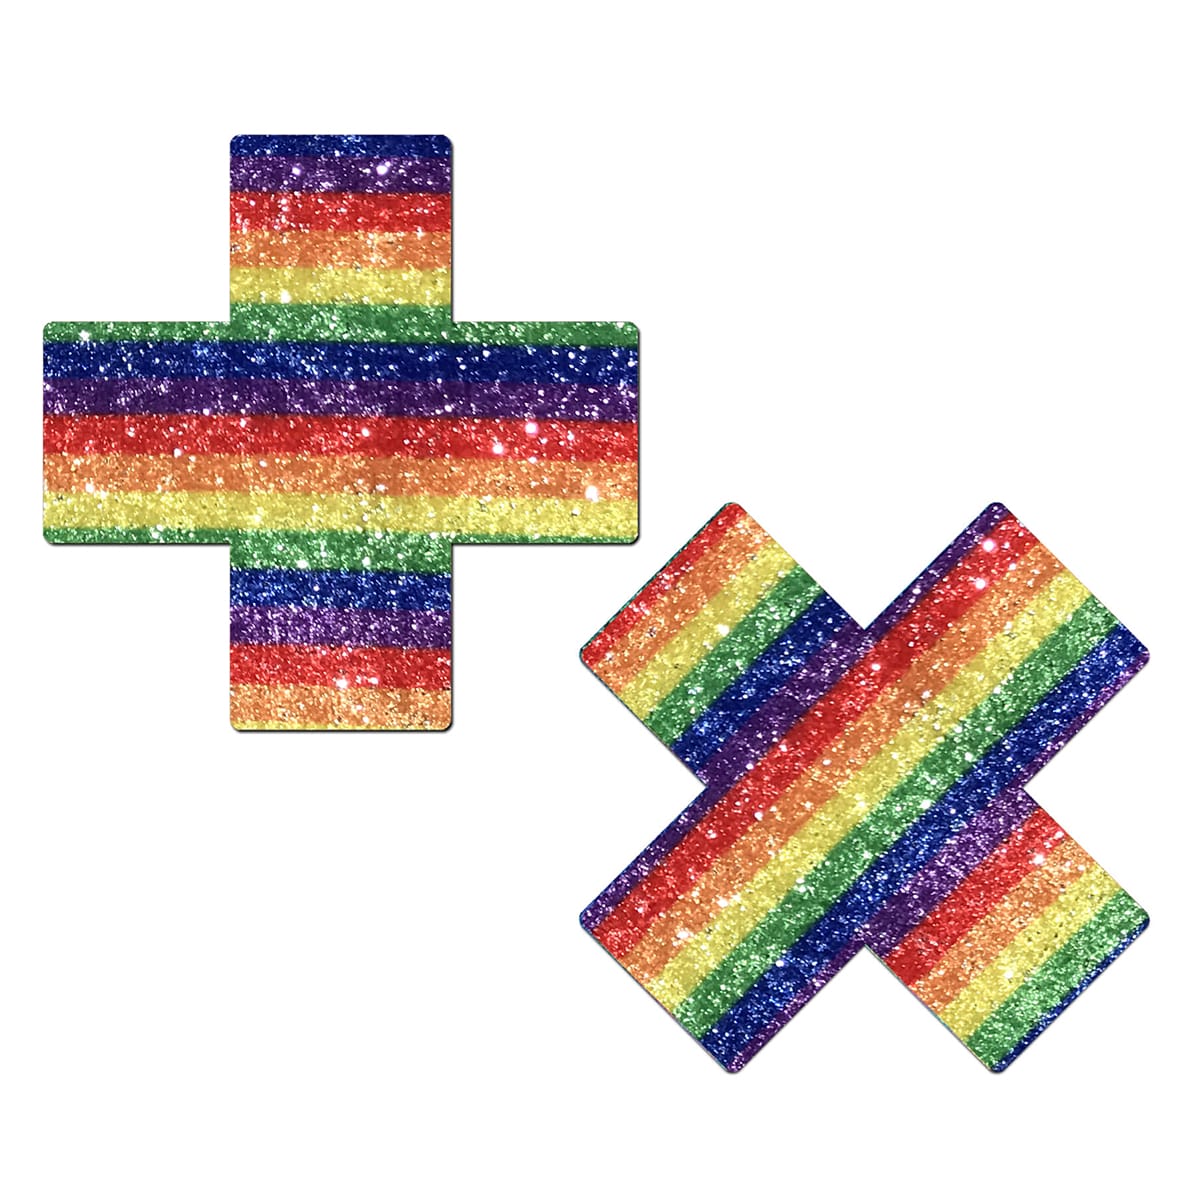 Pastease Rainbow Pride Crosses pasties for sale and in stock.